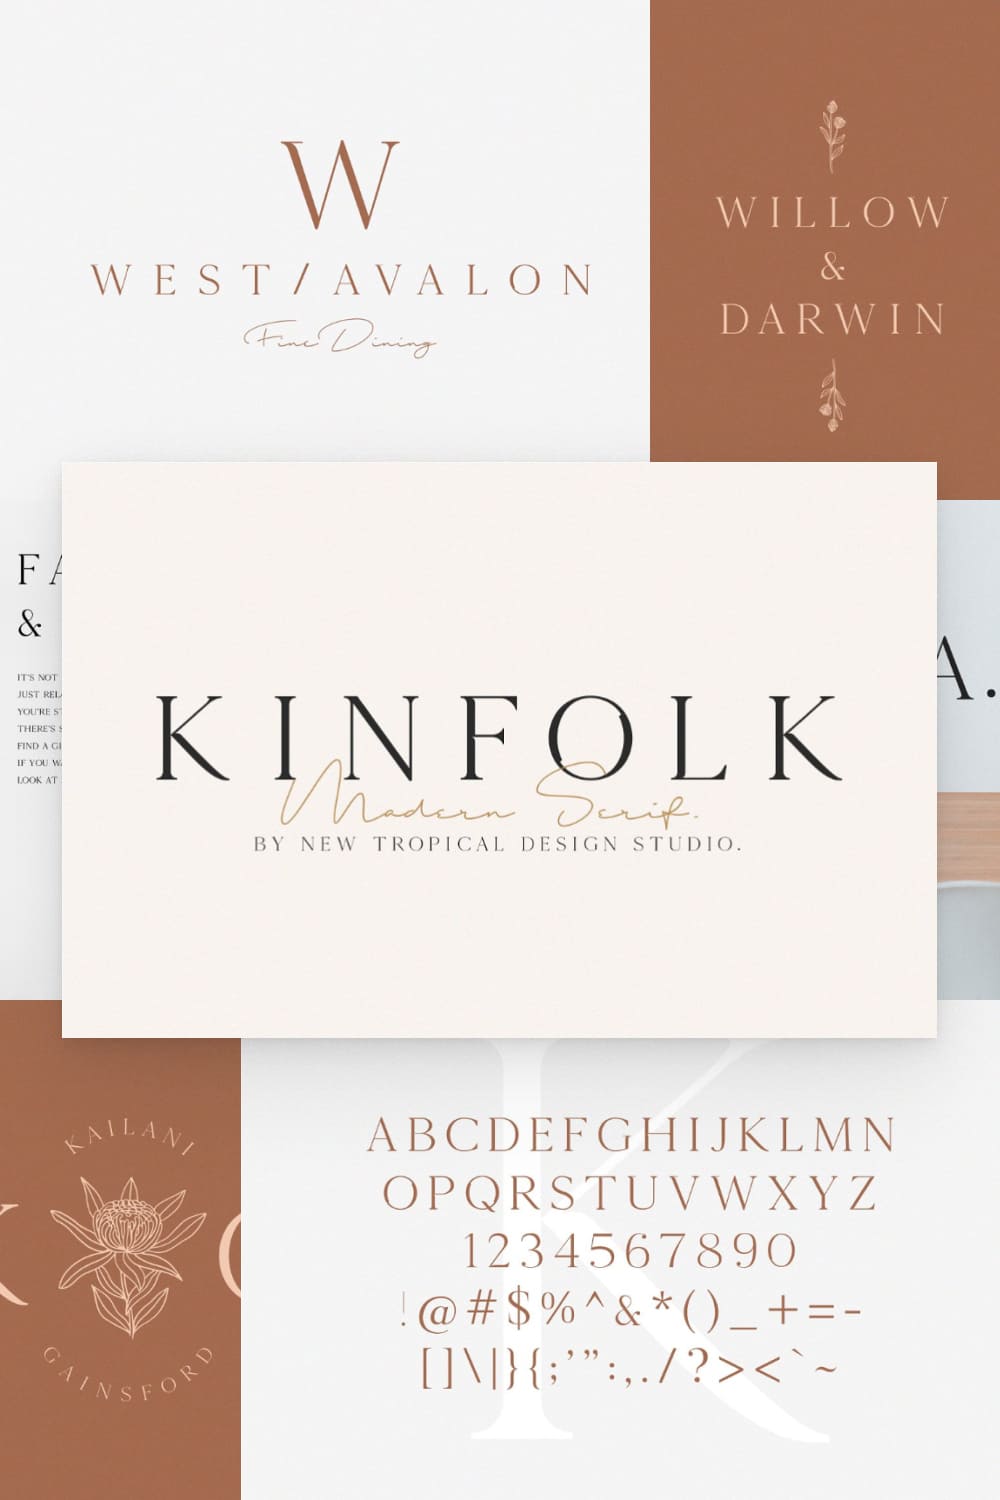 Kinfolk is a classic style serif typeface that has been modernised with its unique curves and cut-ins making it one of the most memorable caps fonts on the market.